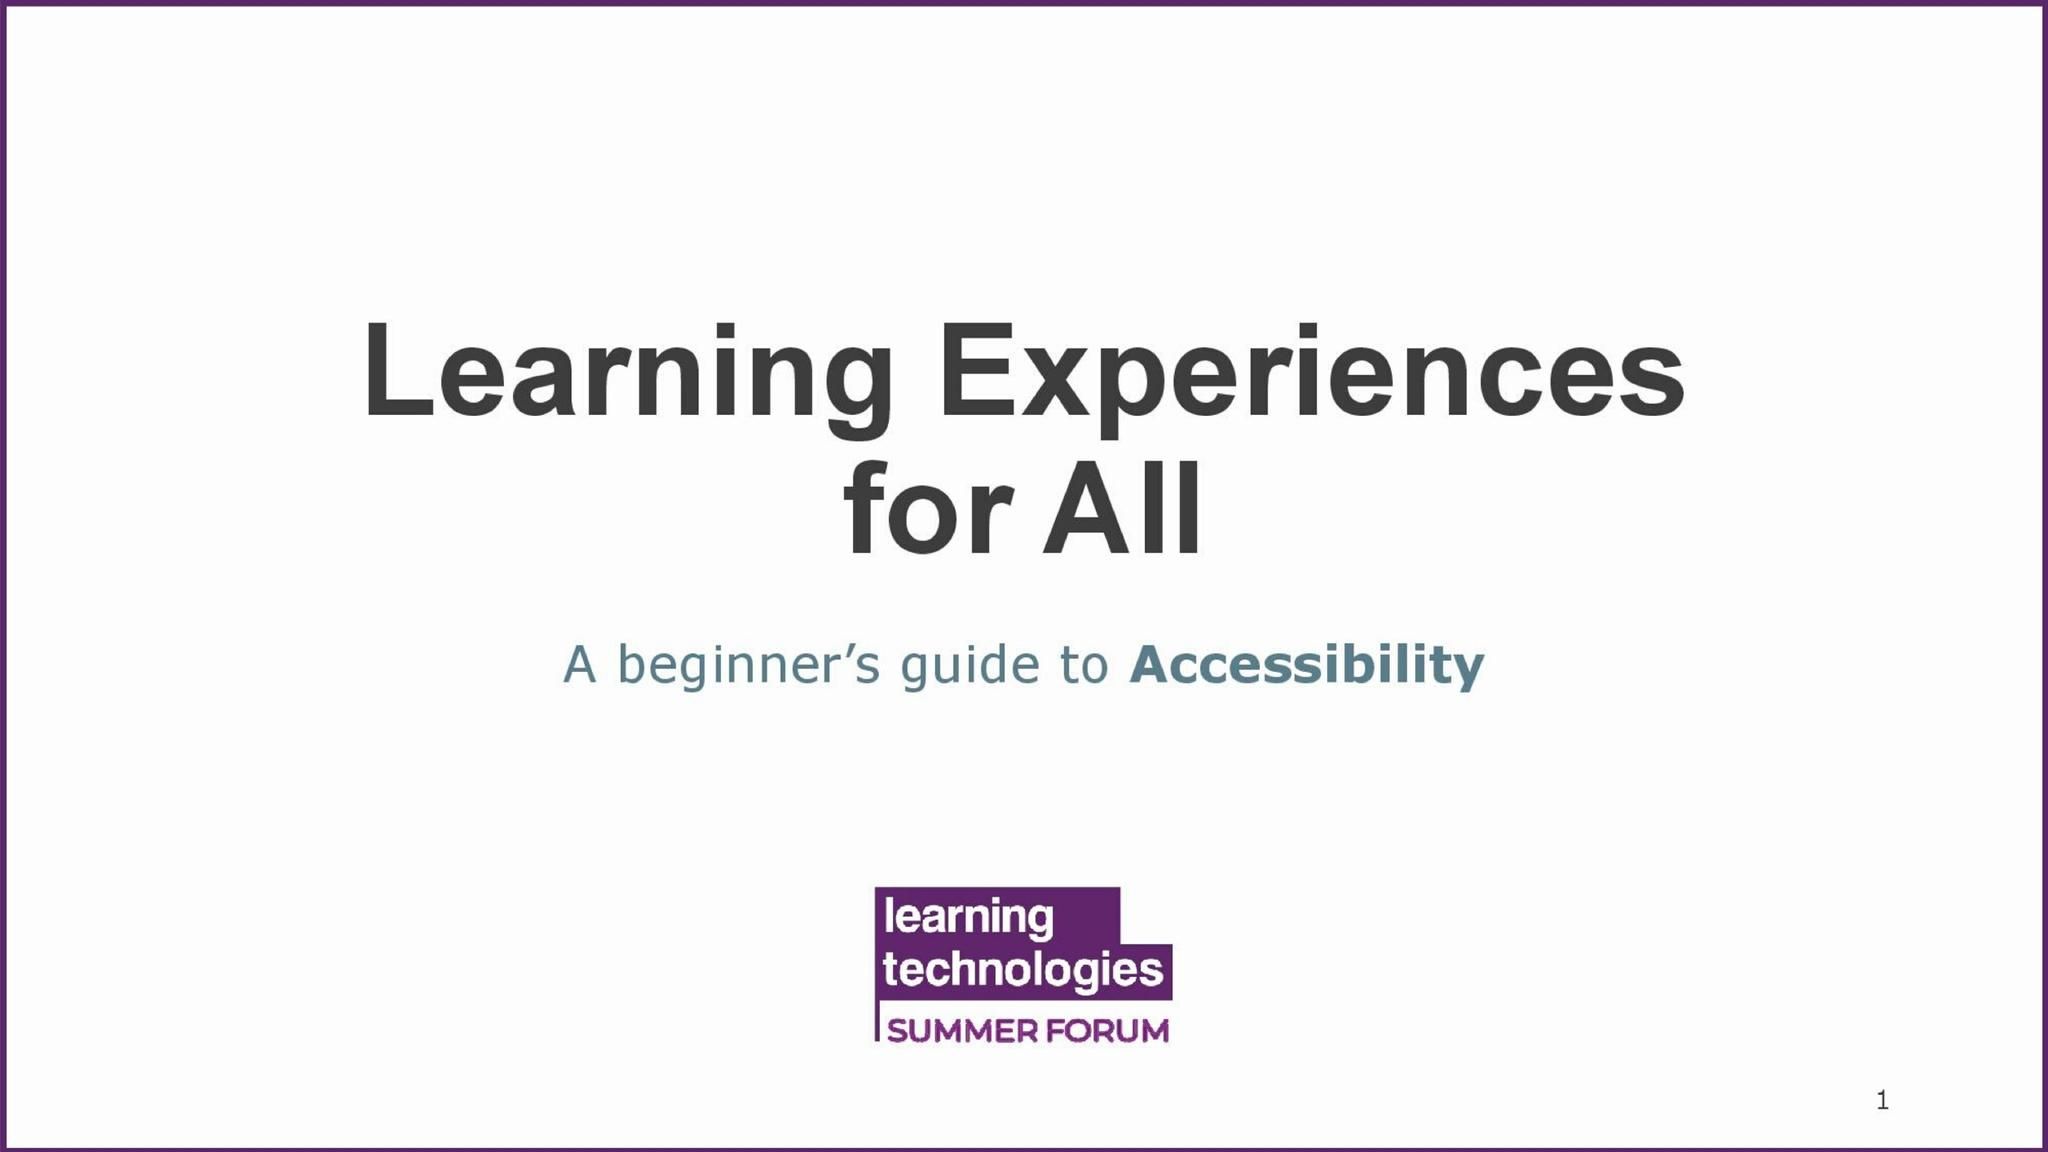 Learning experiences for all: A beginner’s guide to accessibility